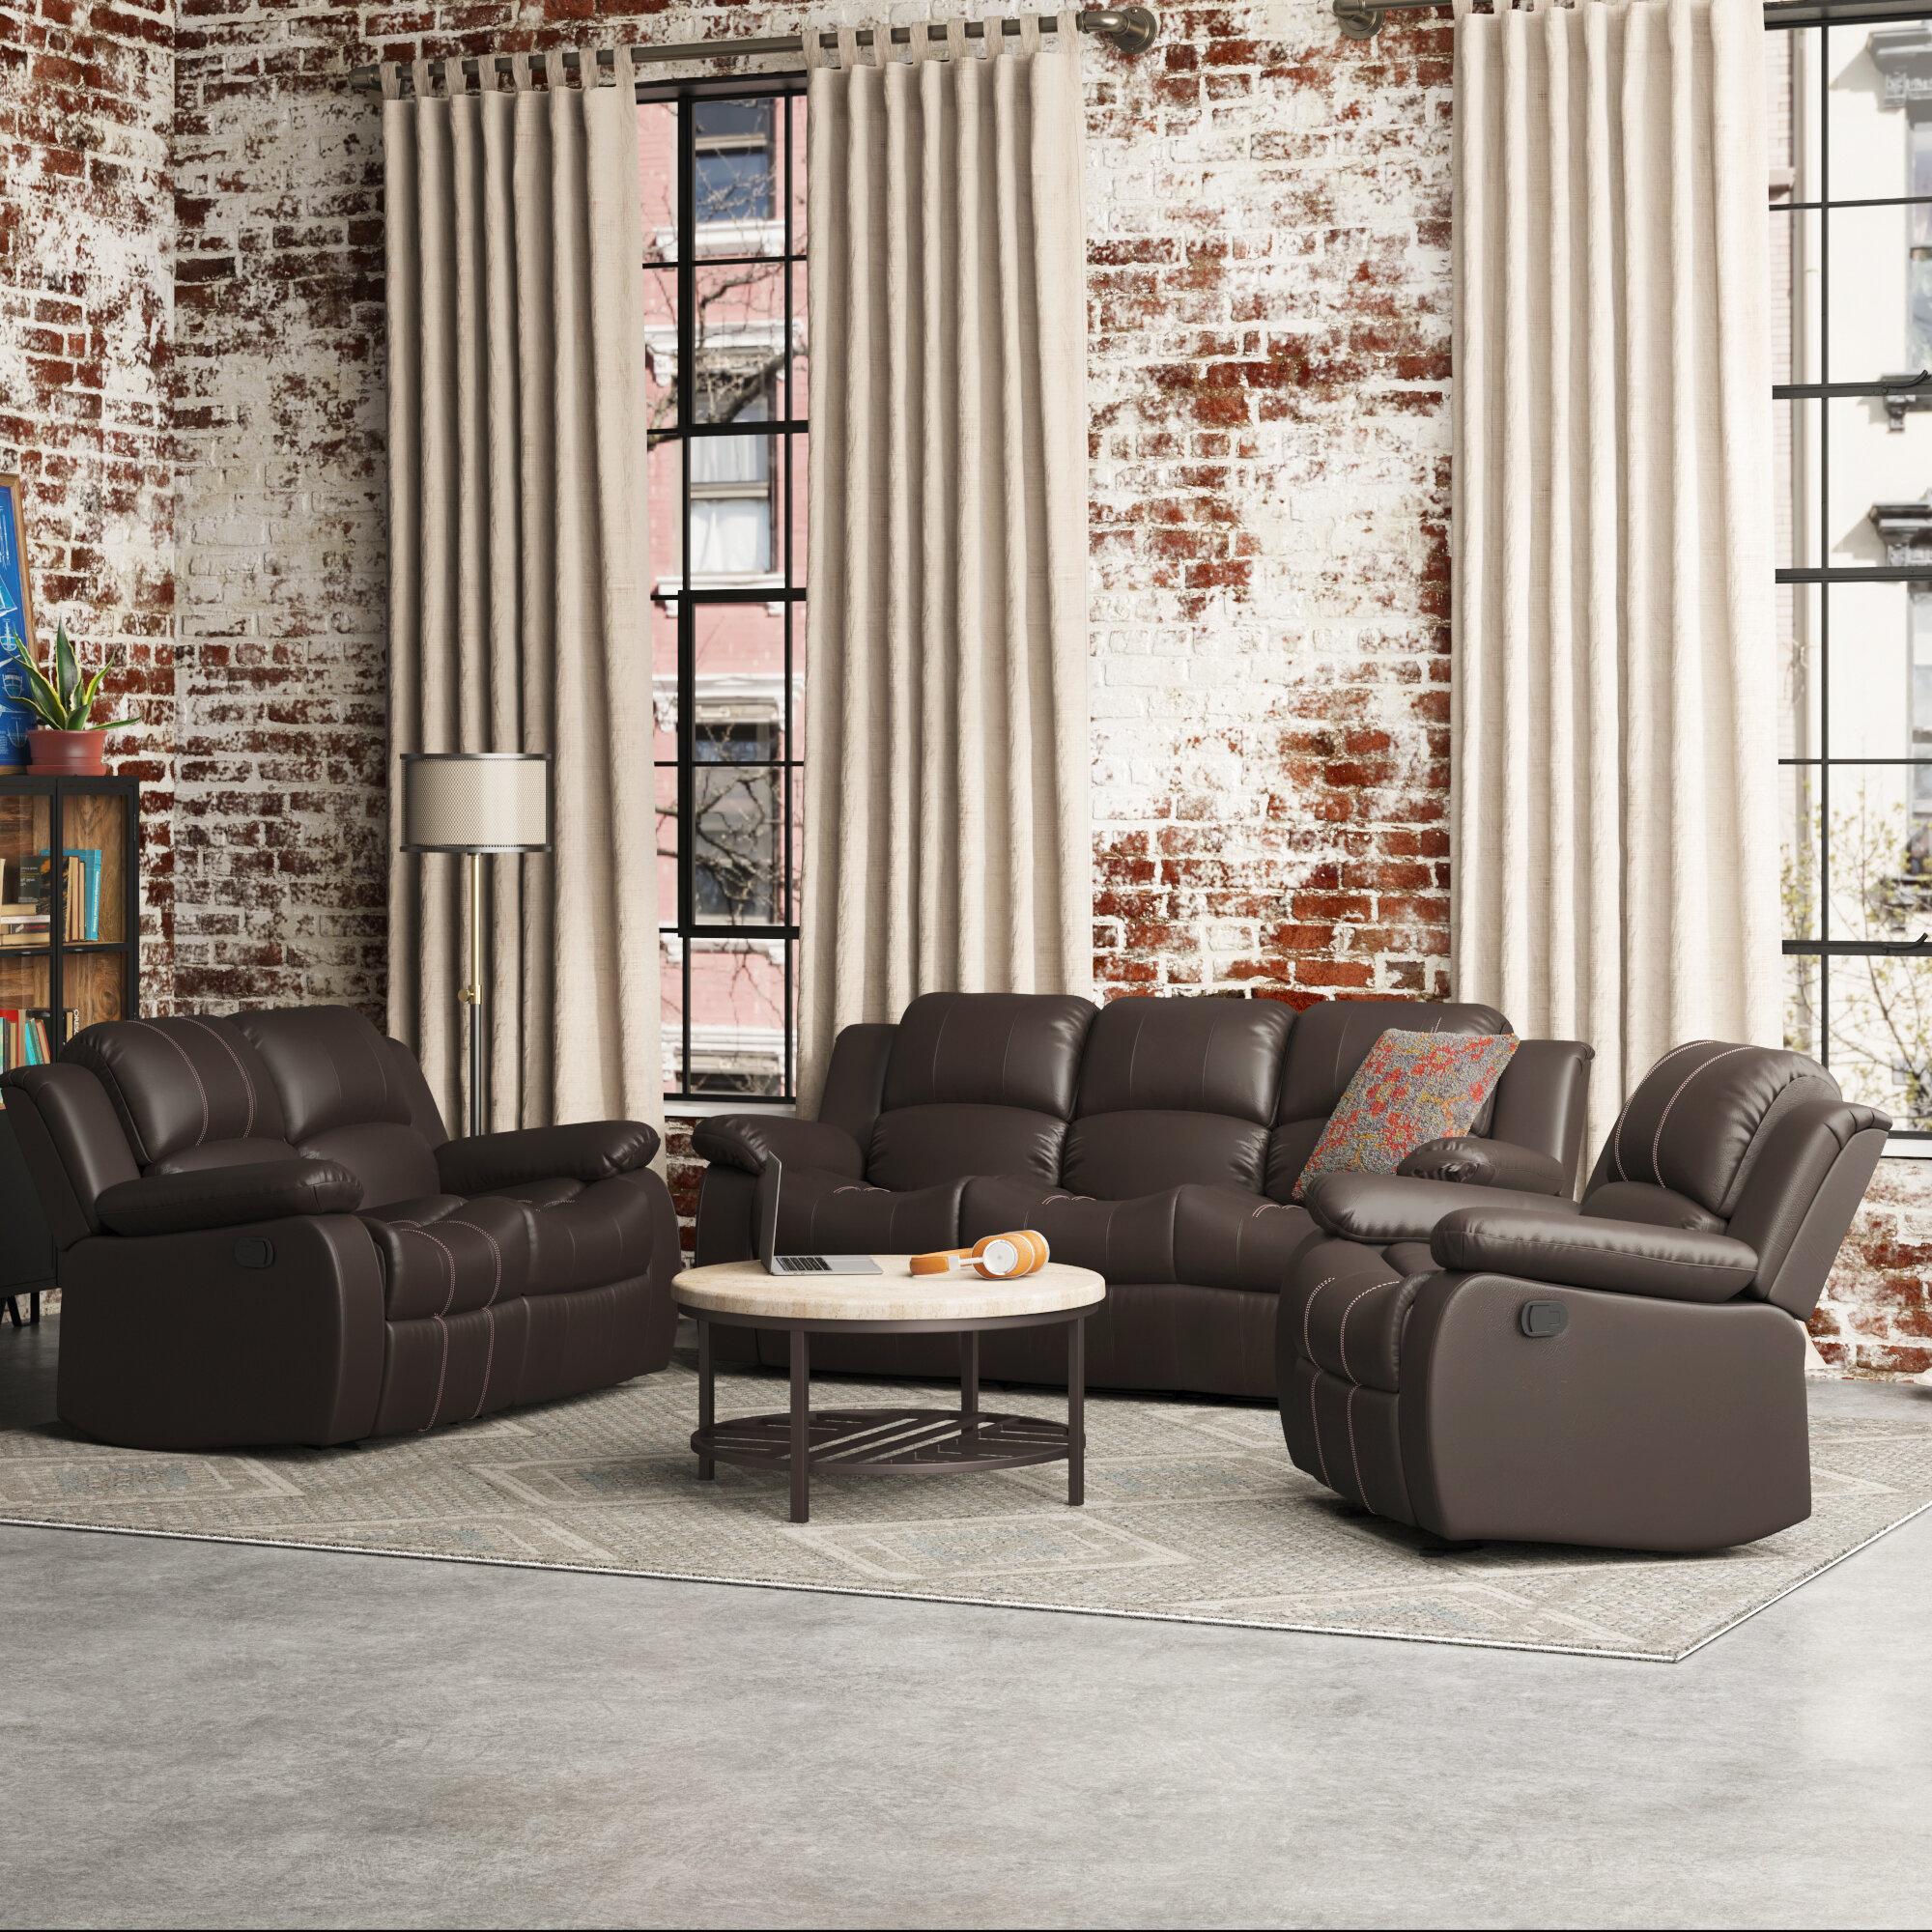 Jean 3 Piece Faux Leather Reclining Living Room Set